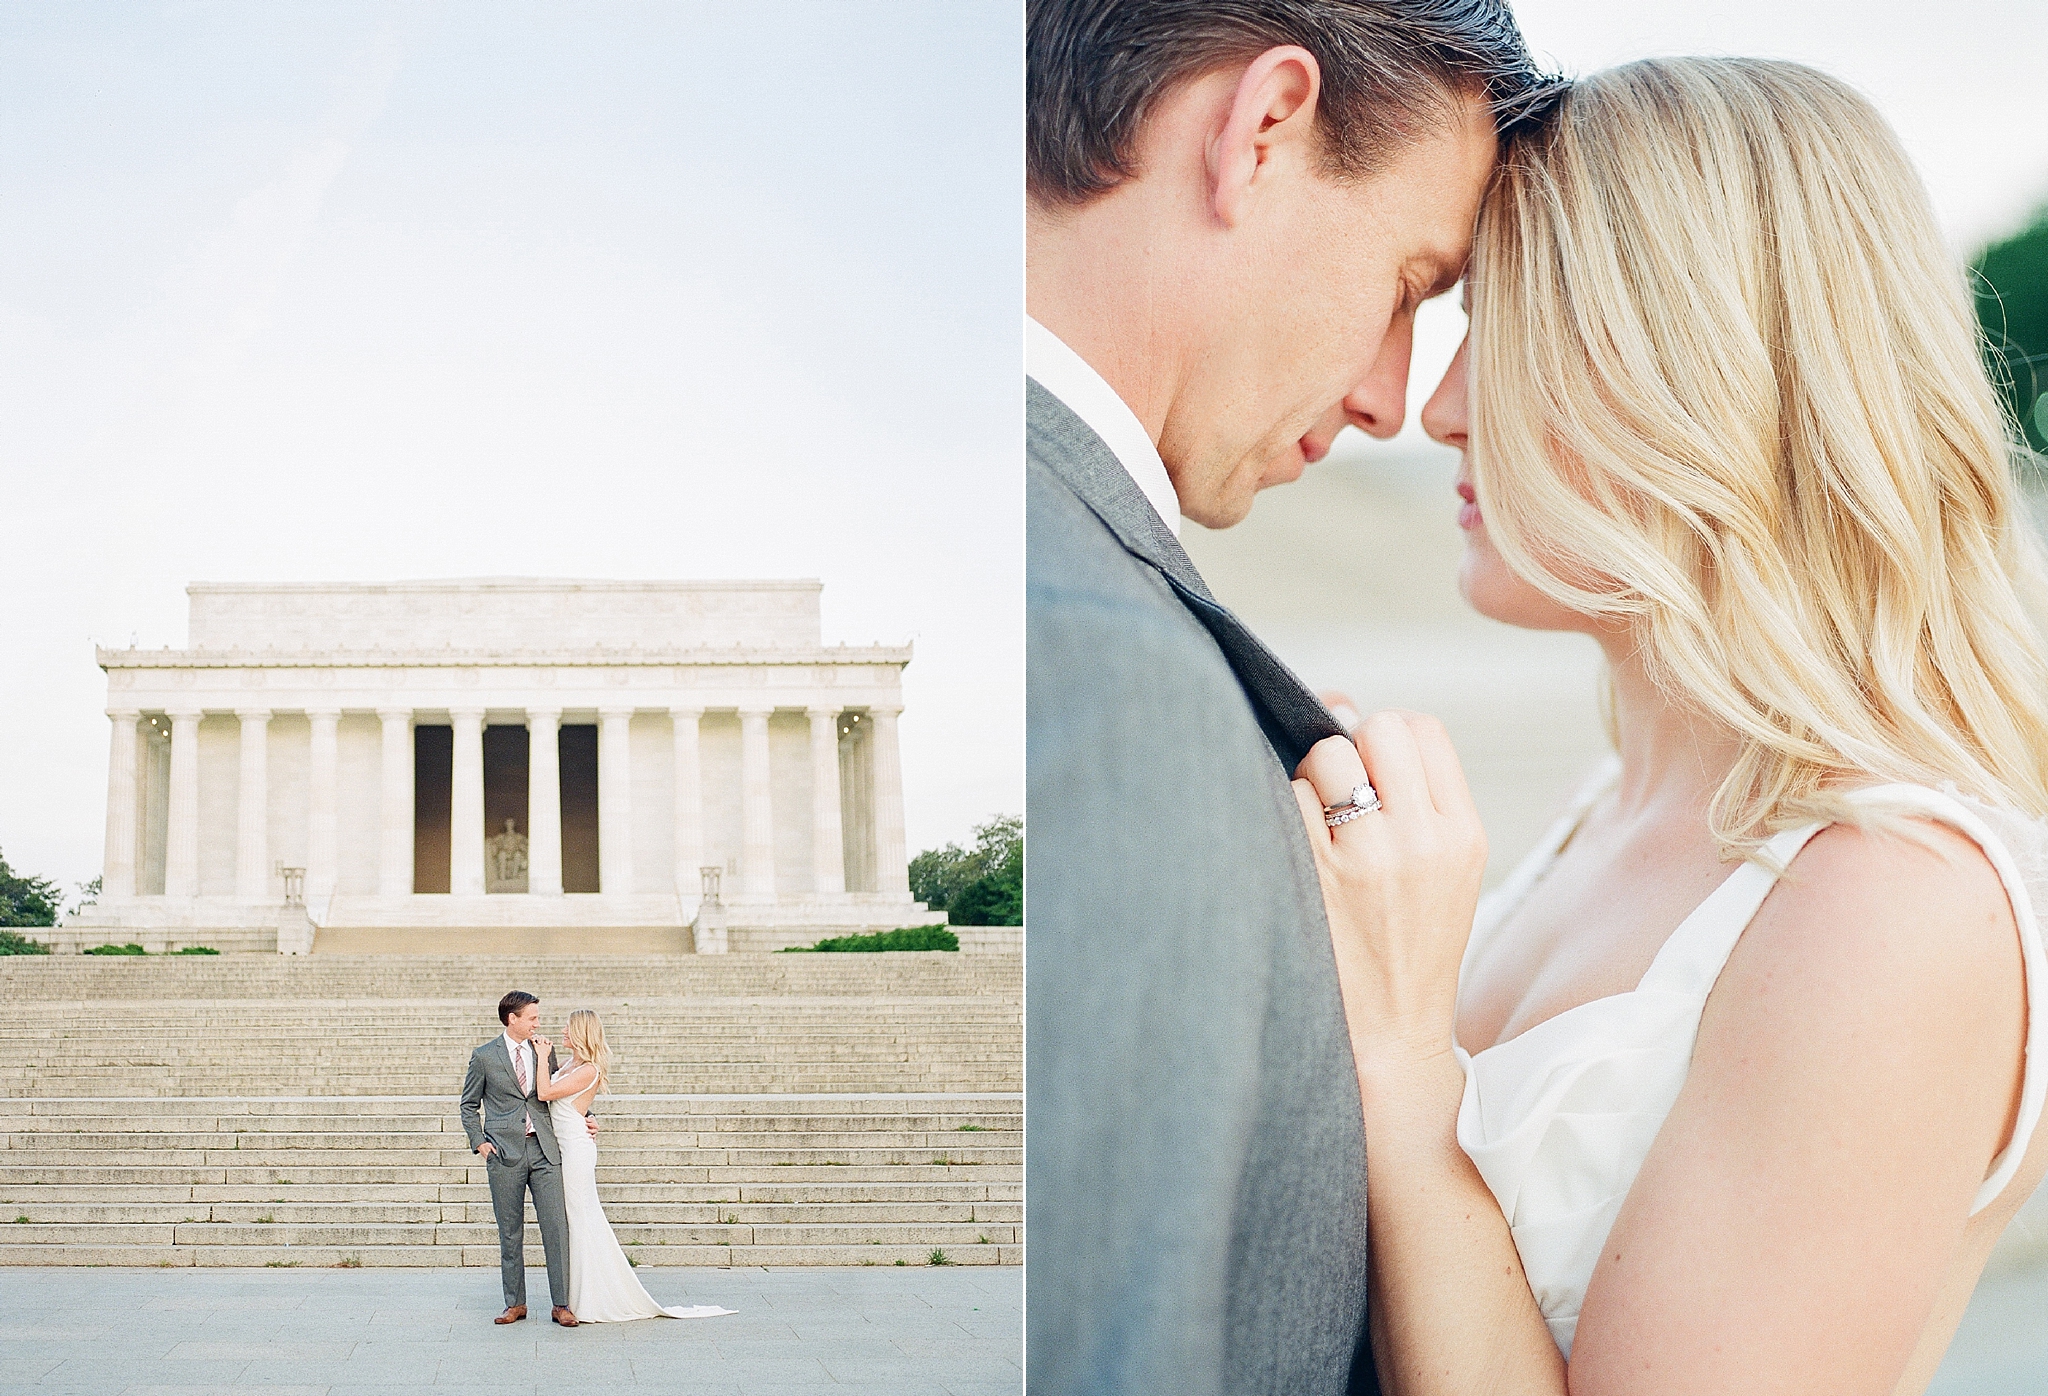 Tips on how to keep the bride and groom cool and comfortable during a hot, summer wedding day in Washington, DC!